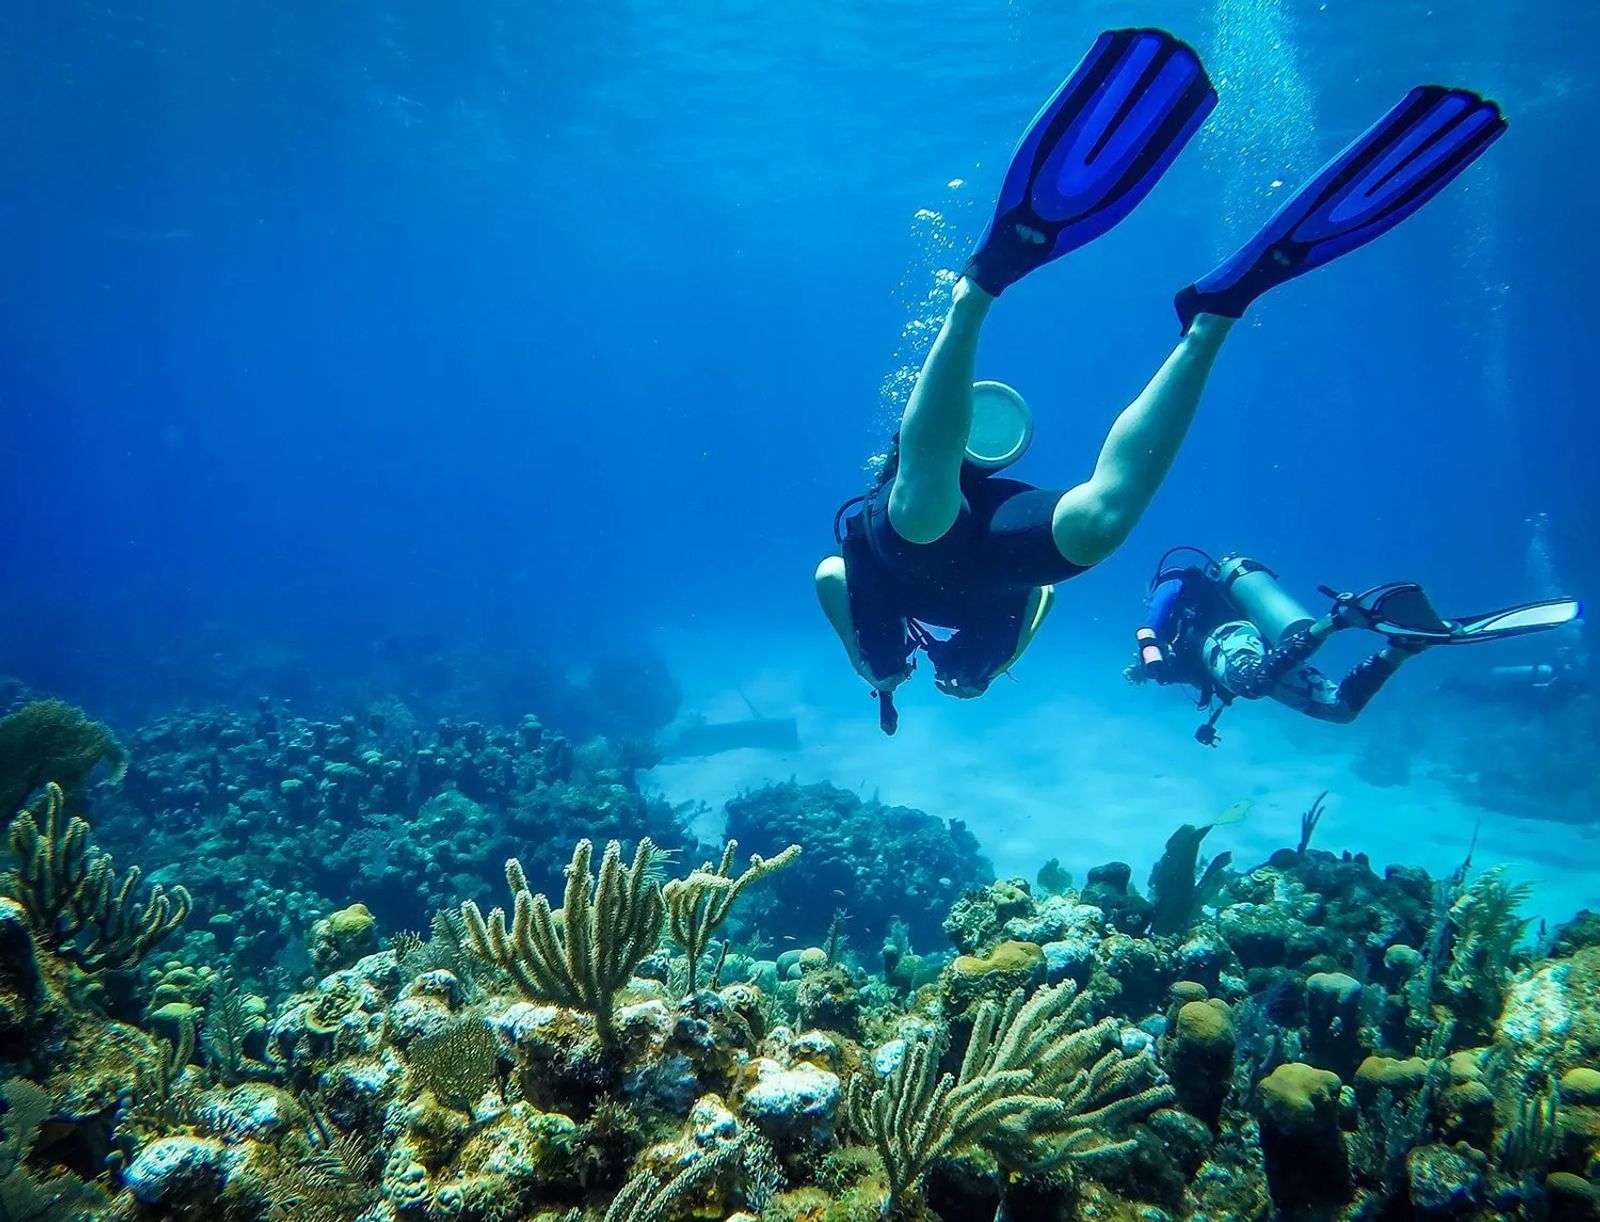 Top Diving Locations Around the World